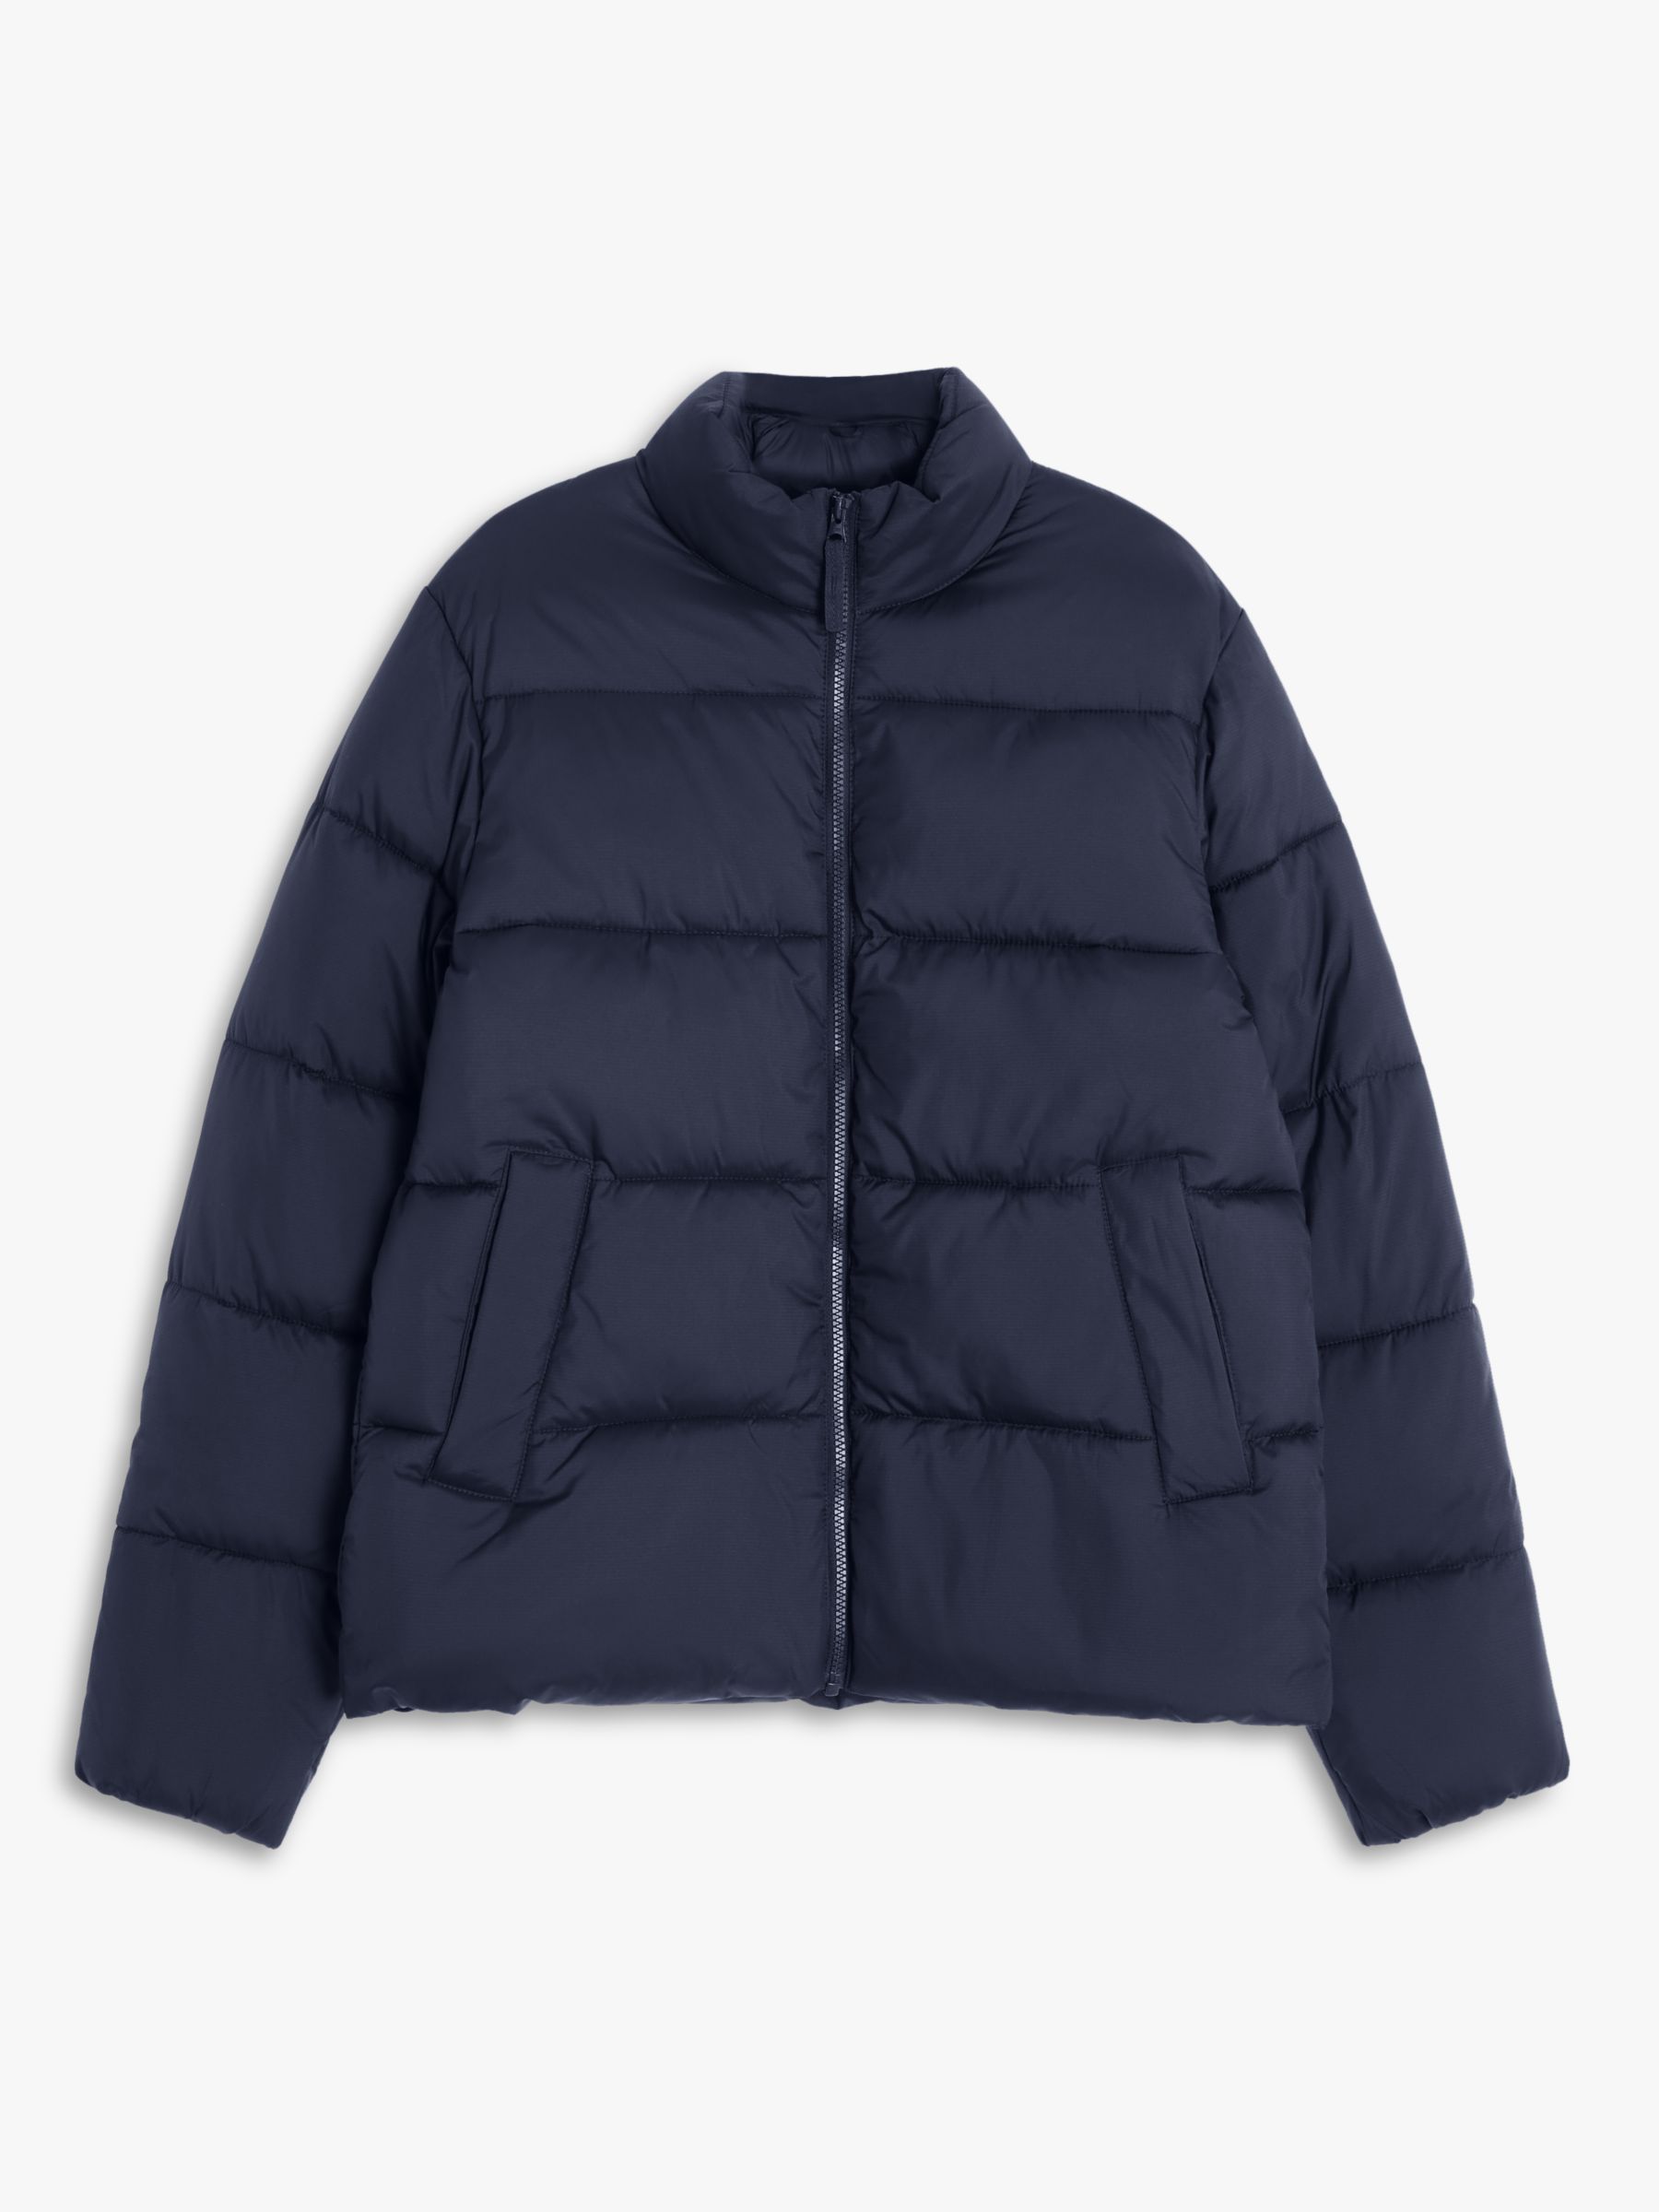 John Lewis ANYDAY Recycled Water Repellent Puffer Jacket